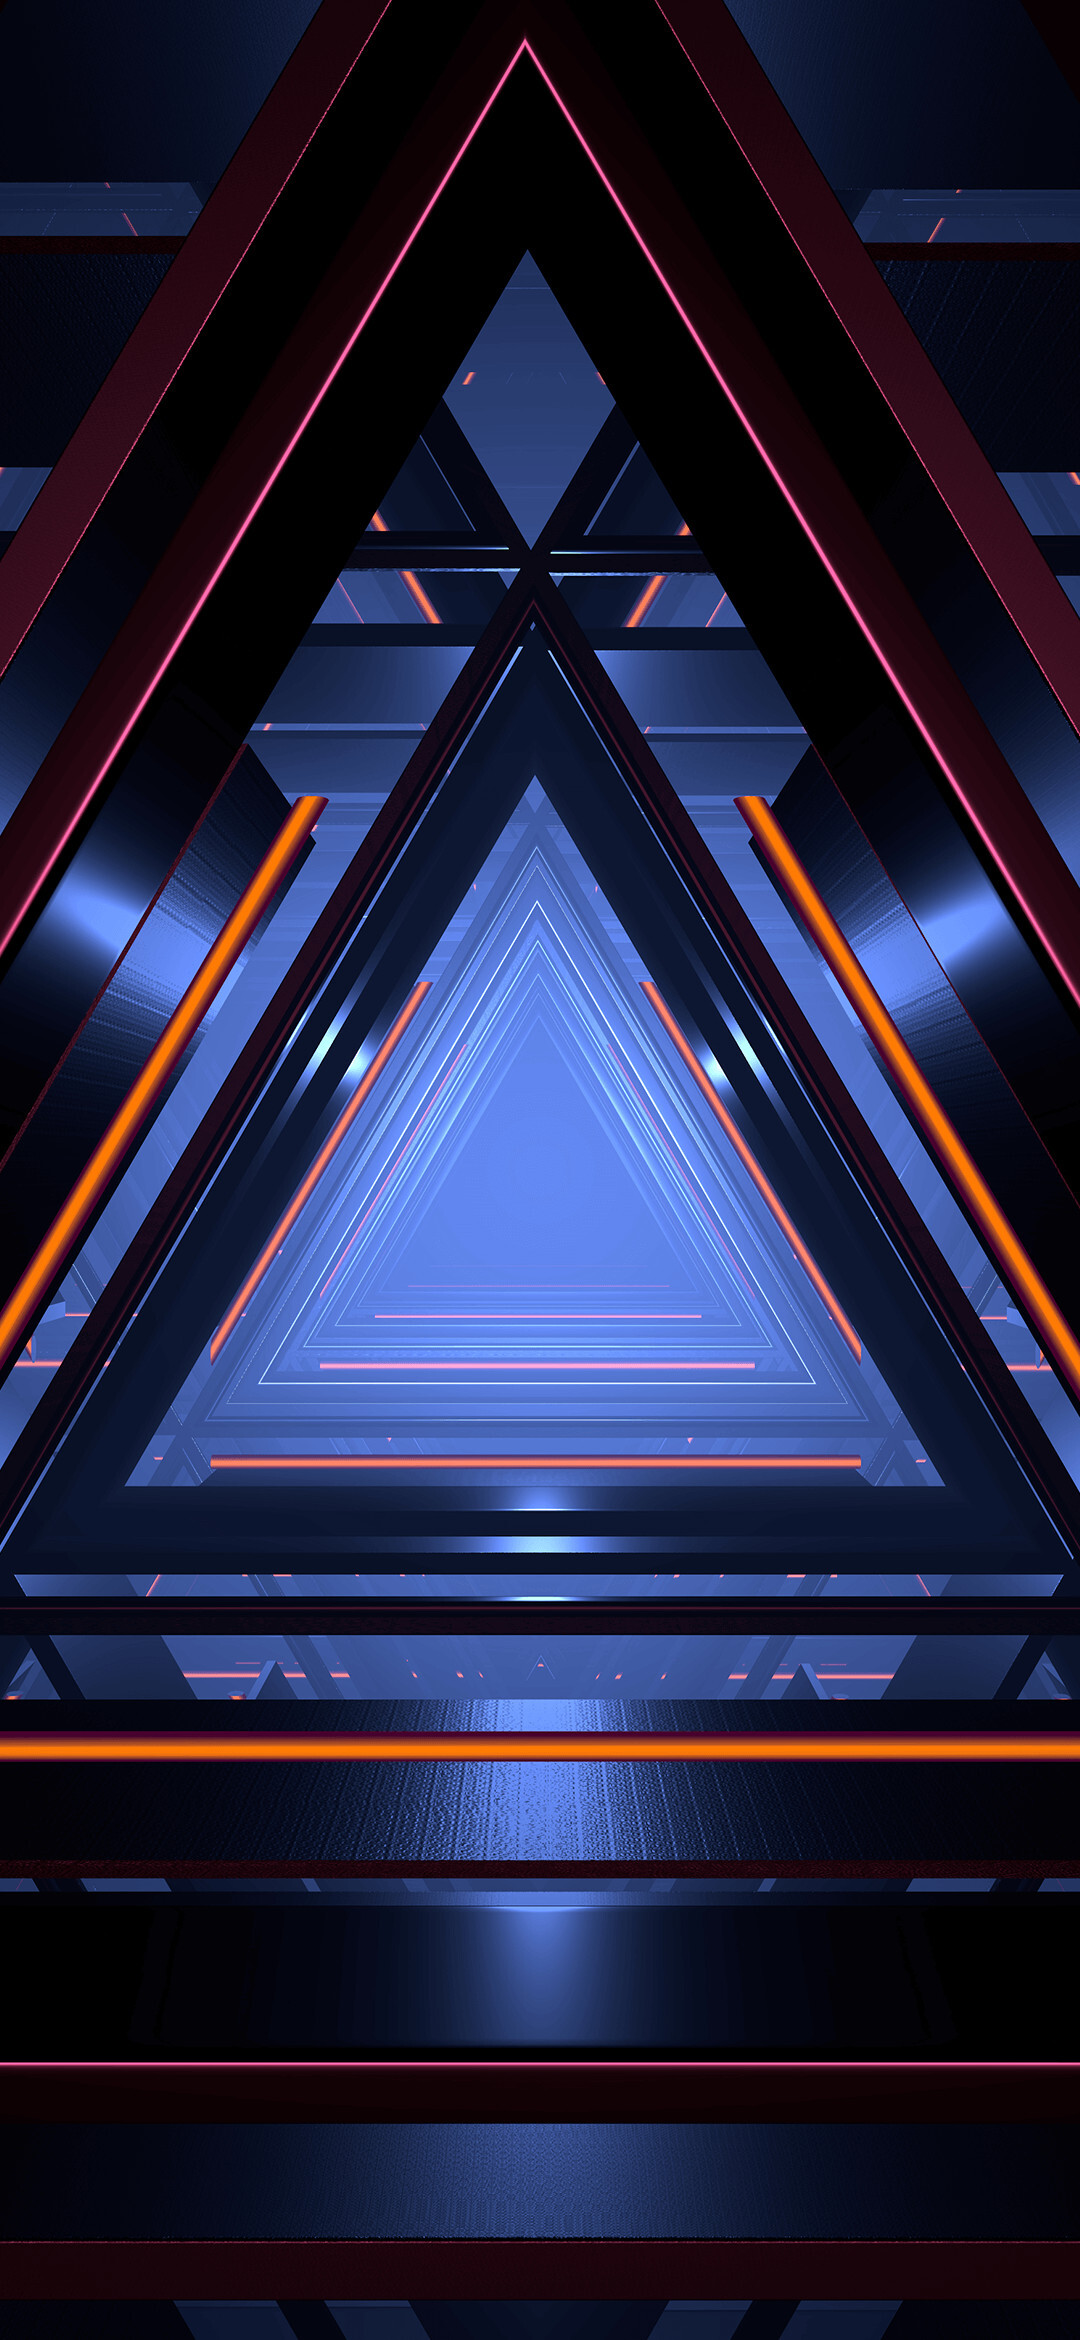 Triangle: Three-dimensional space, Acute angles, Multicolored lines. 1080x2340 HD Wallpaper.